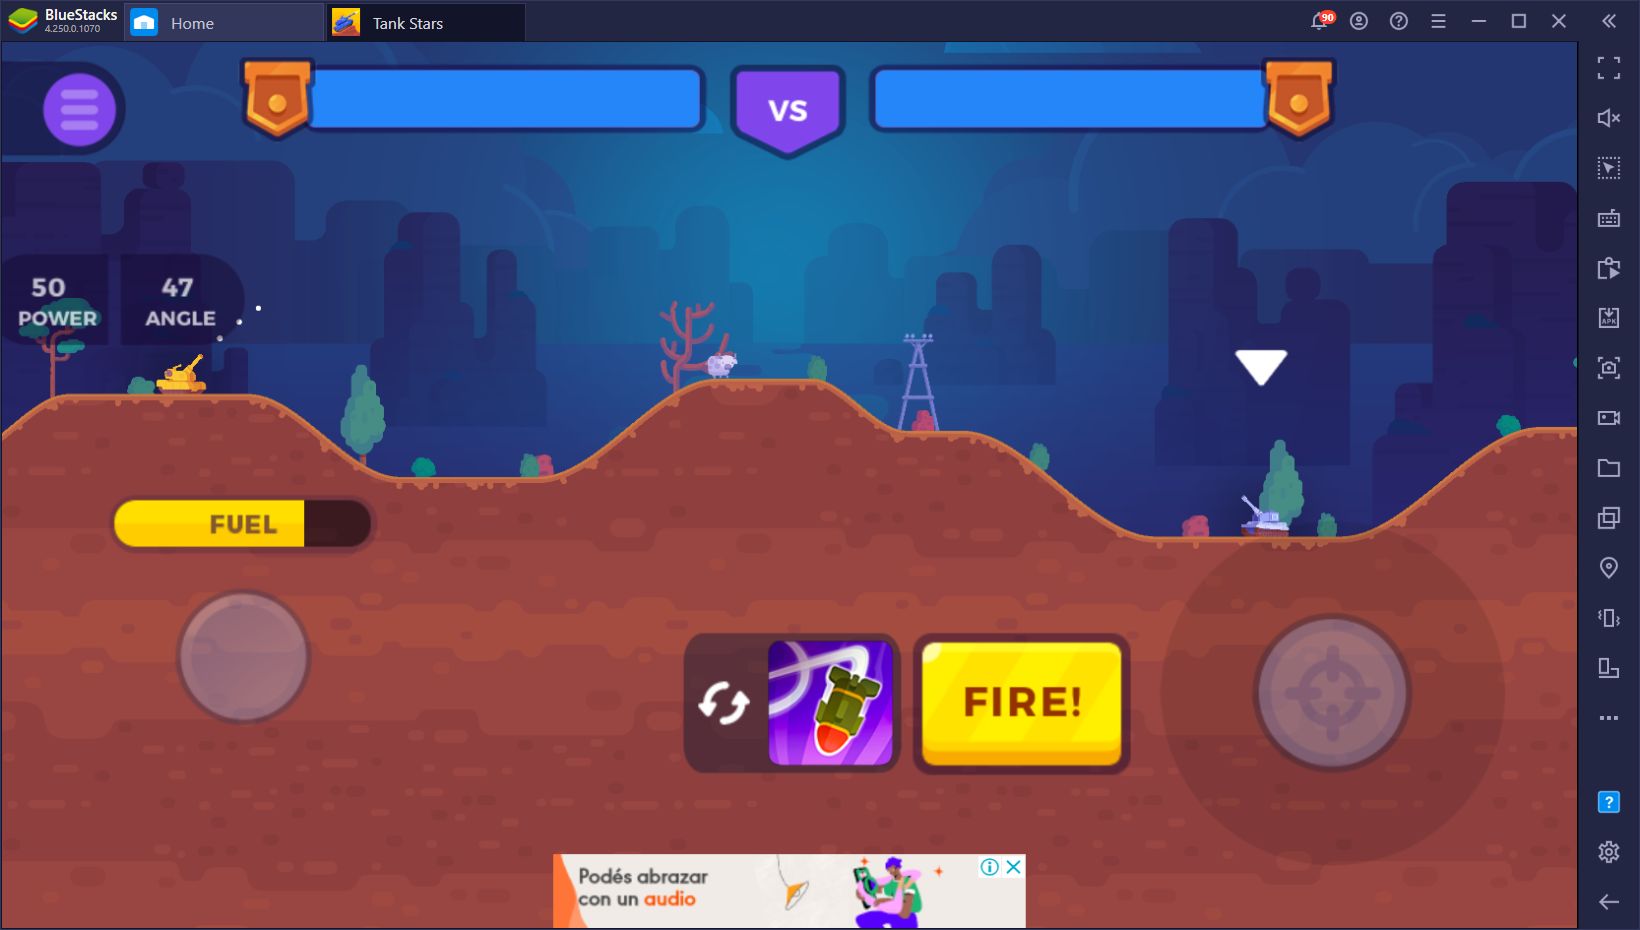 How to Play Tank Stars on PC with BlueStacks